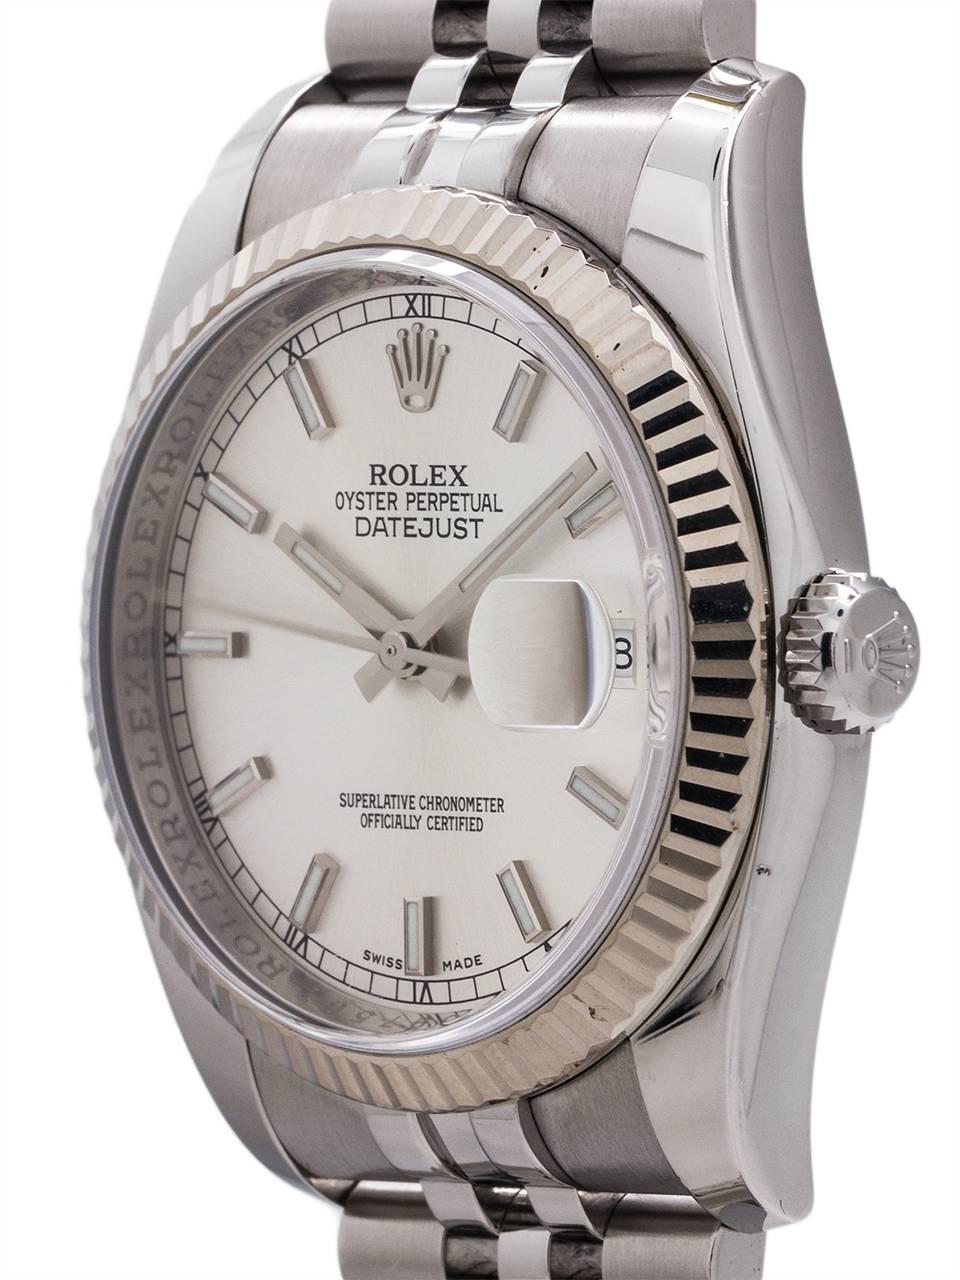 
Recent production Rolex Datejust ref # 116234, random serial # circa 2010+ in very minty preowned condition. Featuring classic 36mm diameter new style robust case with 18K WG fluted bezel, sapphire crystal, beautiful original silvered satin dial